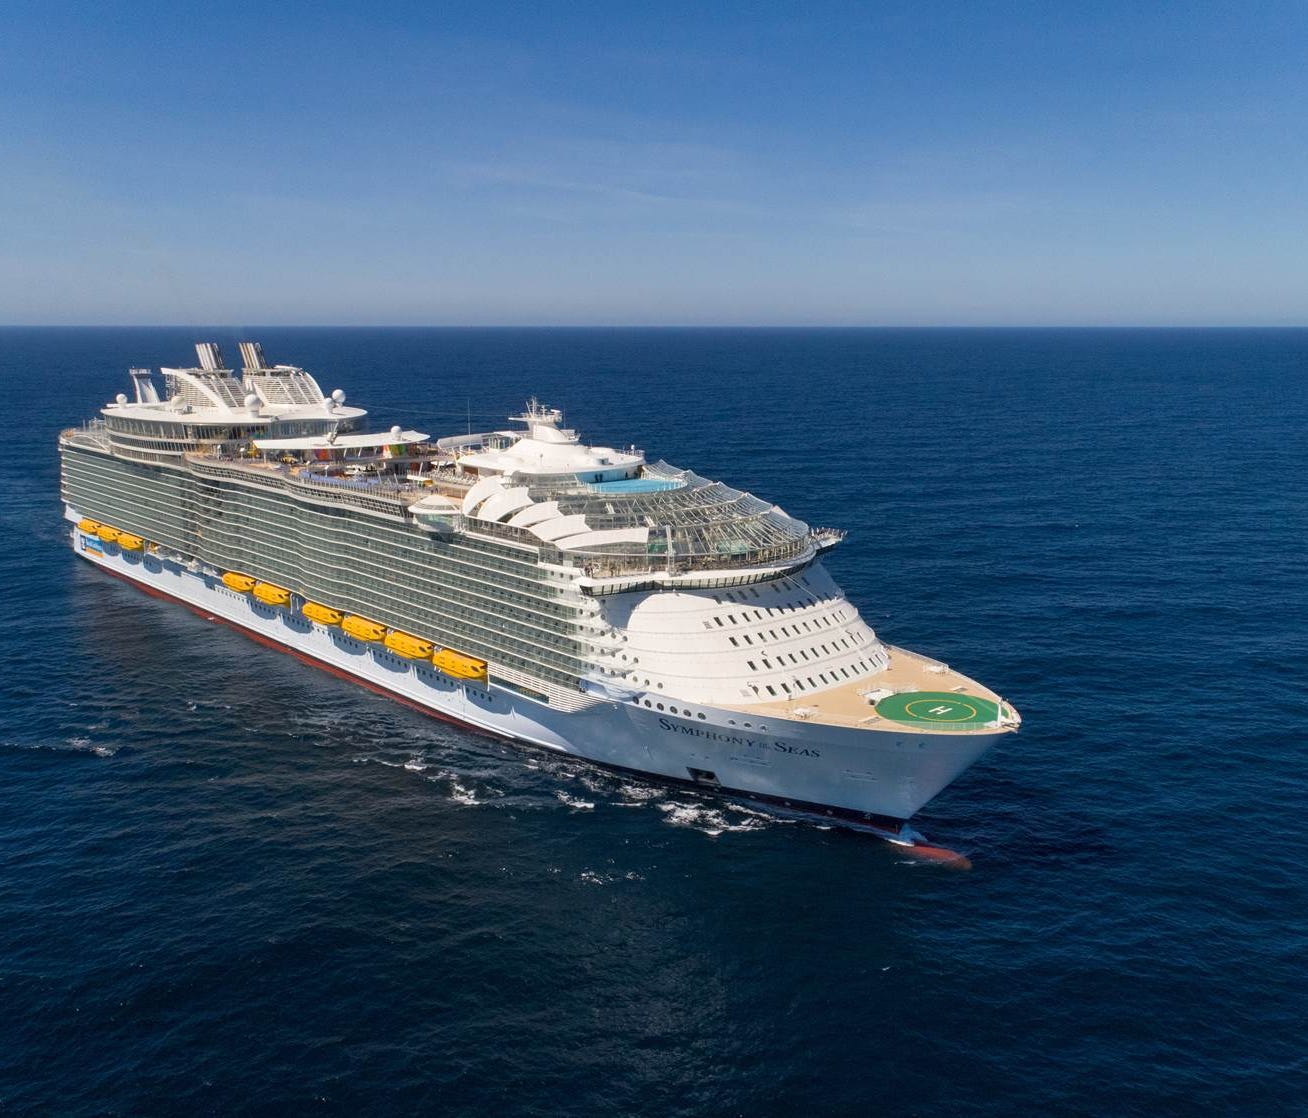 At 228,081 gross register tons, Royal Caribbean's Symphony of the Seas is the largest cruise ship ever built.